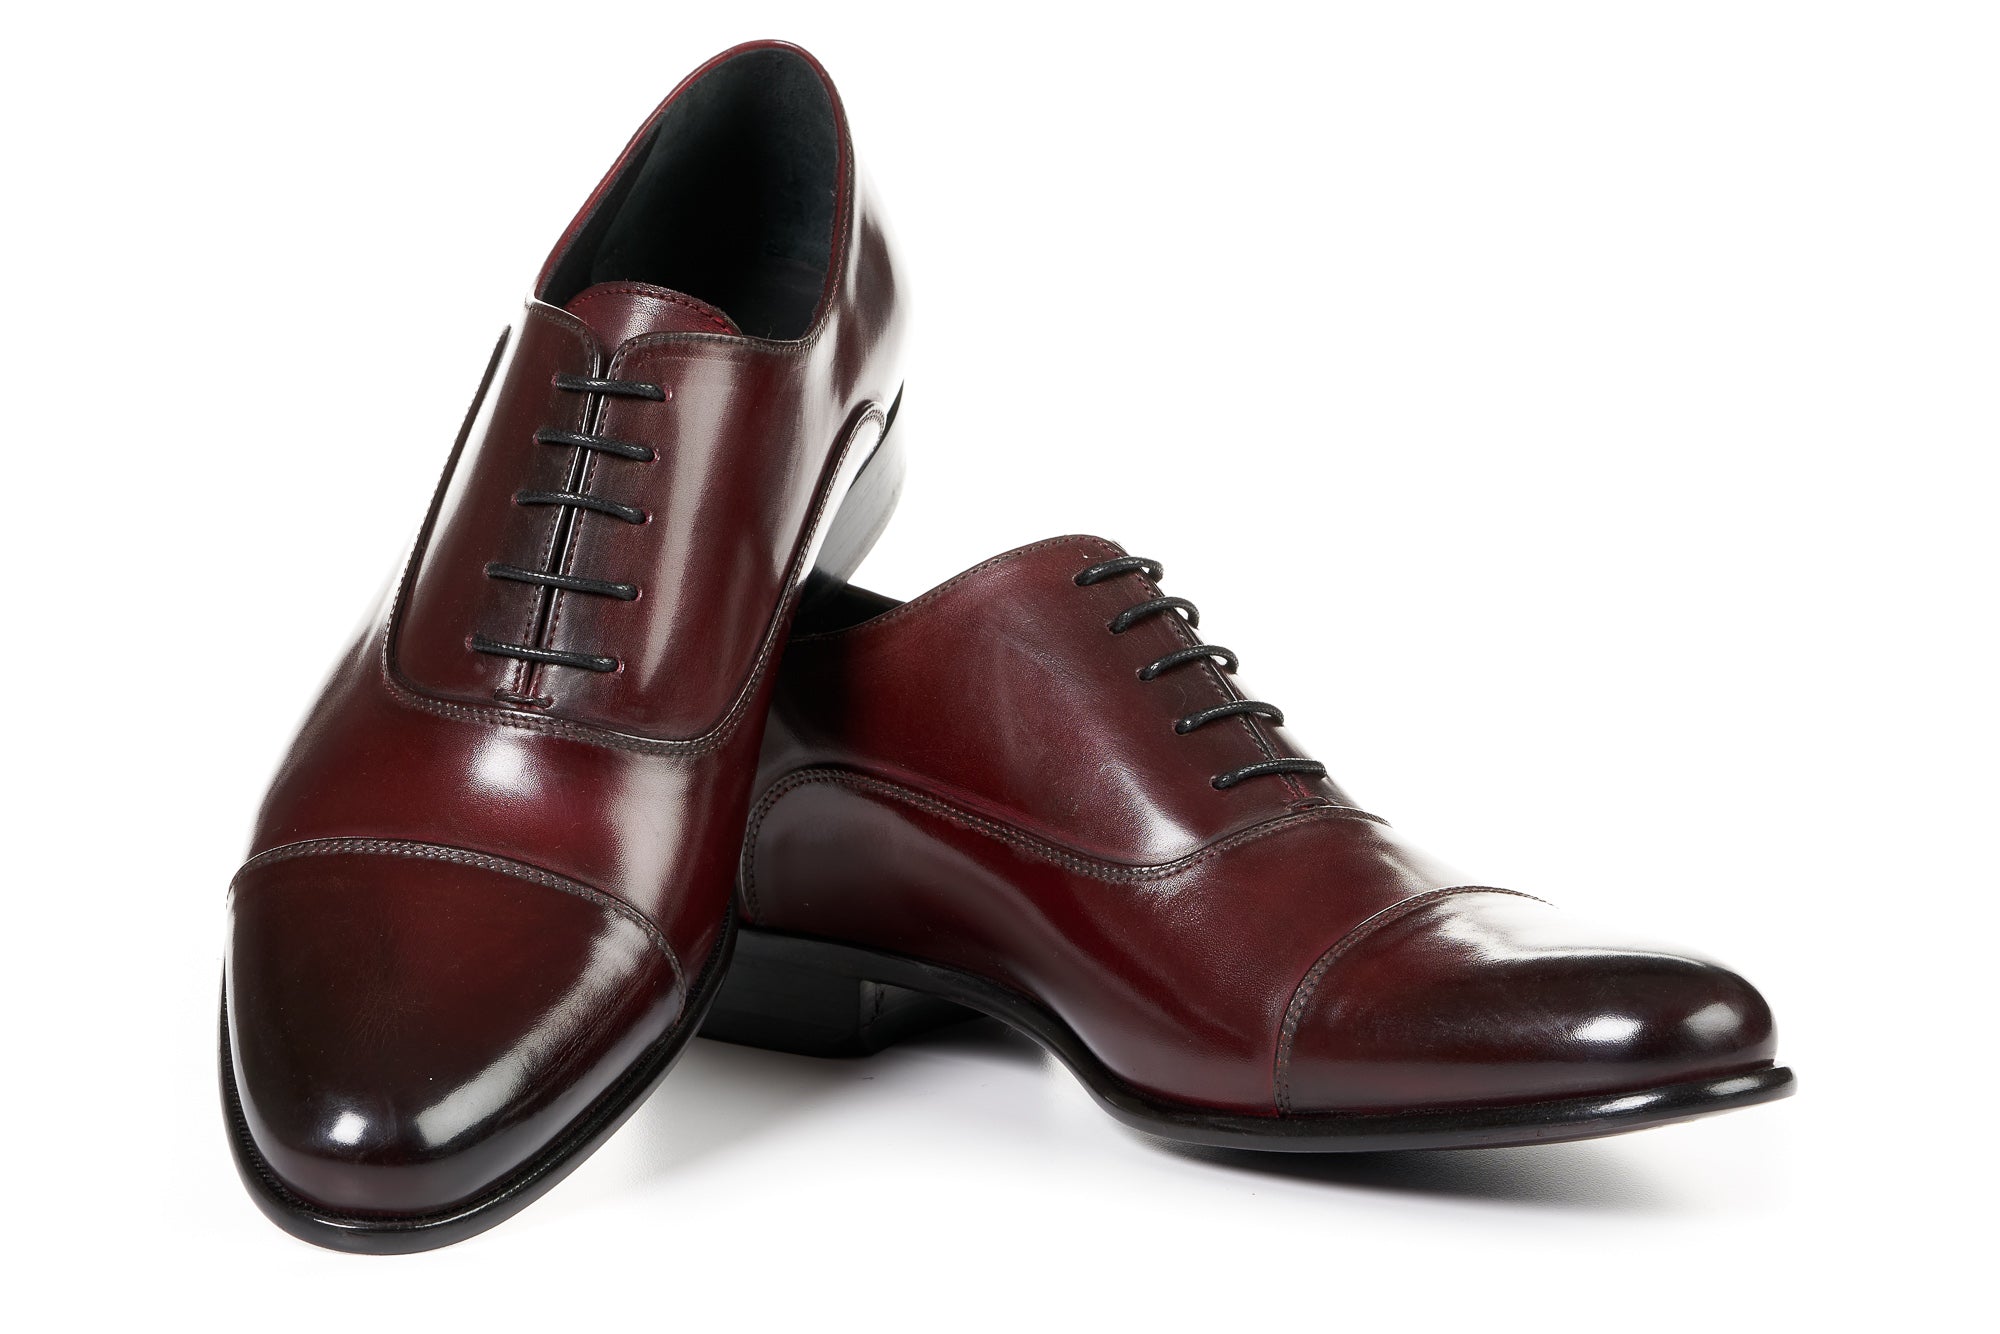 The Cagney II Stitched Cap-Toe Oxford - Oxblood